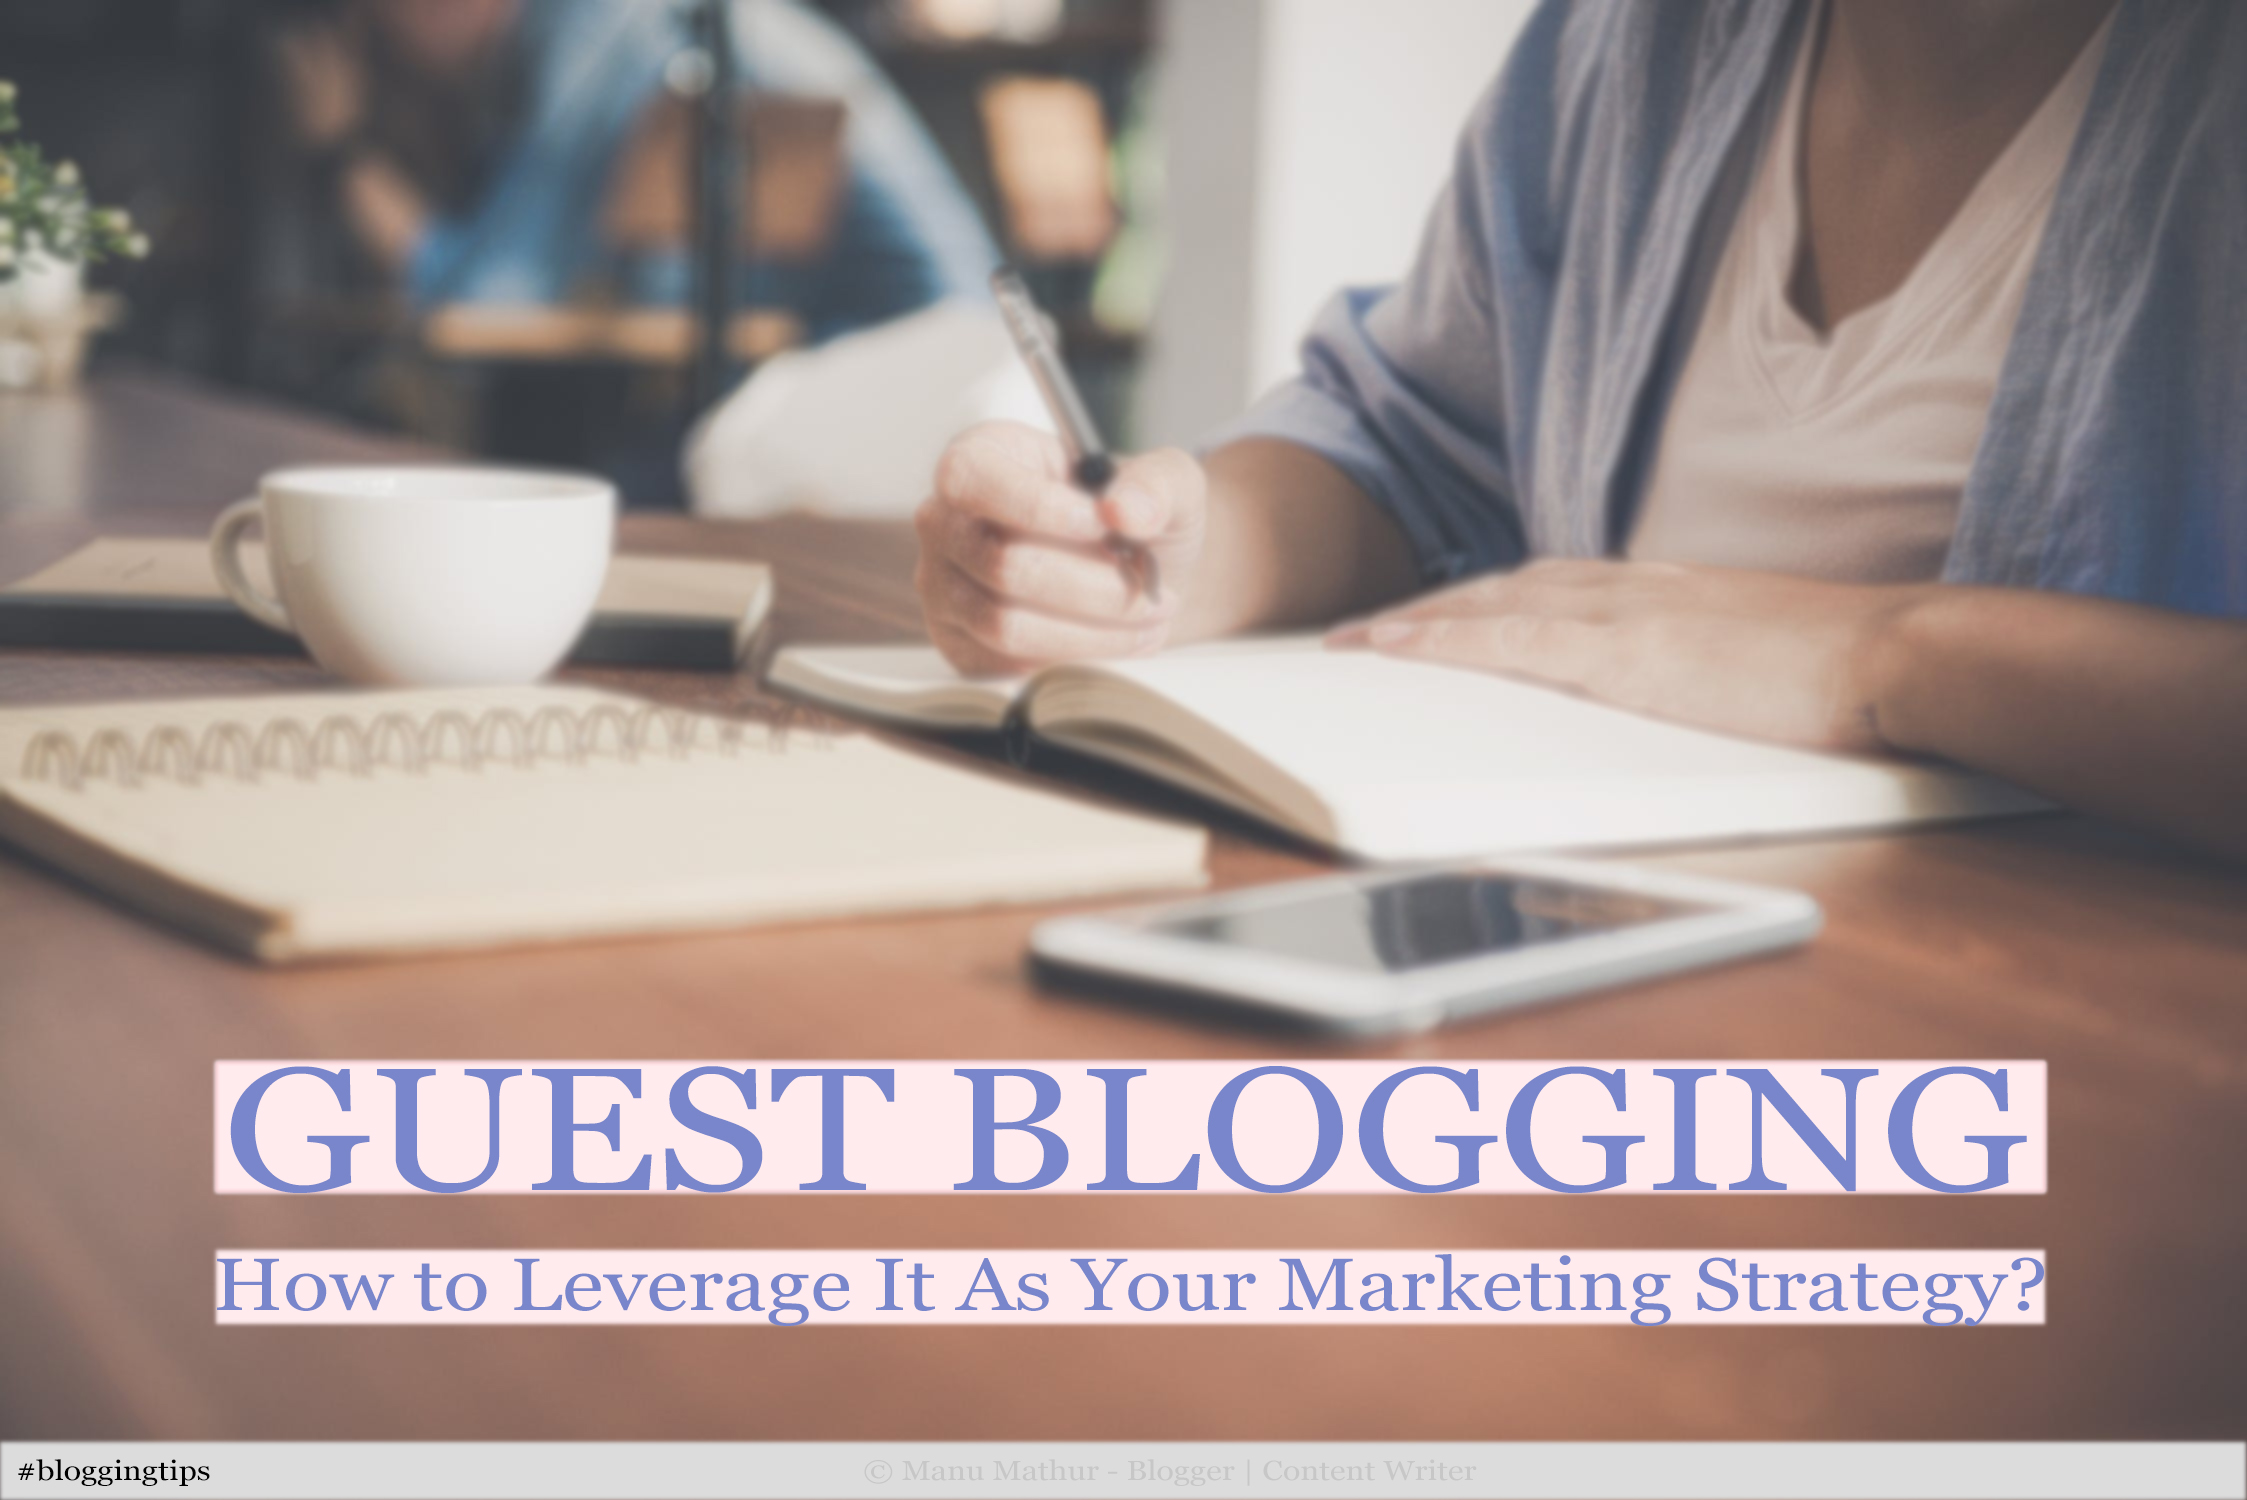 Guest Blogging: How to Use it As Your Marketing Strategy?